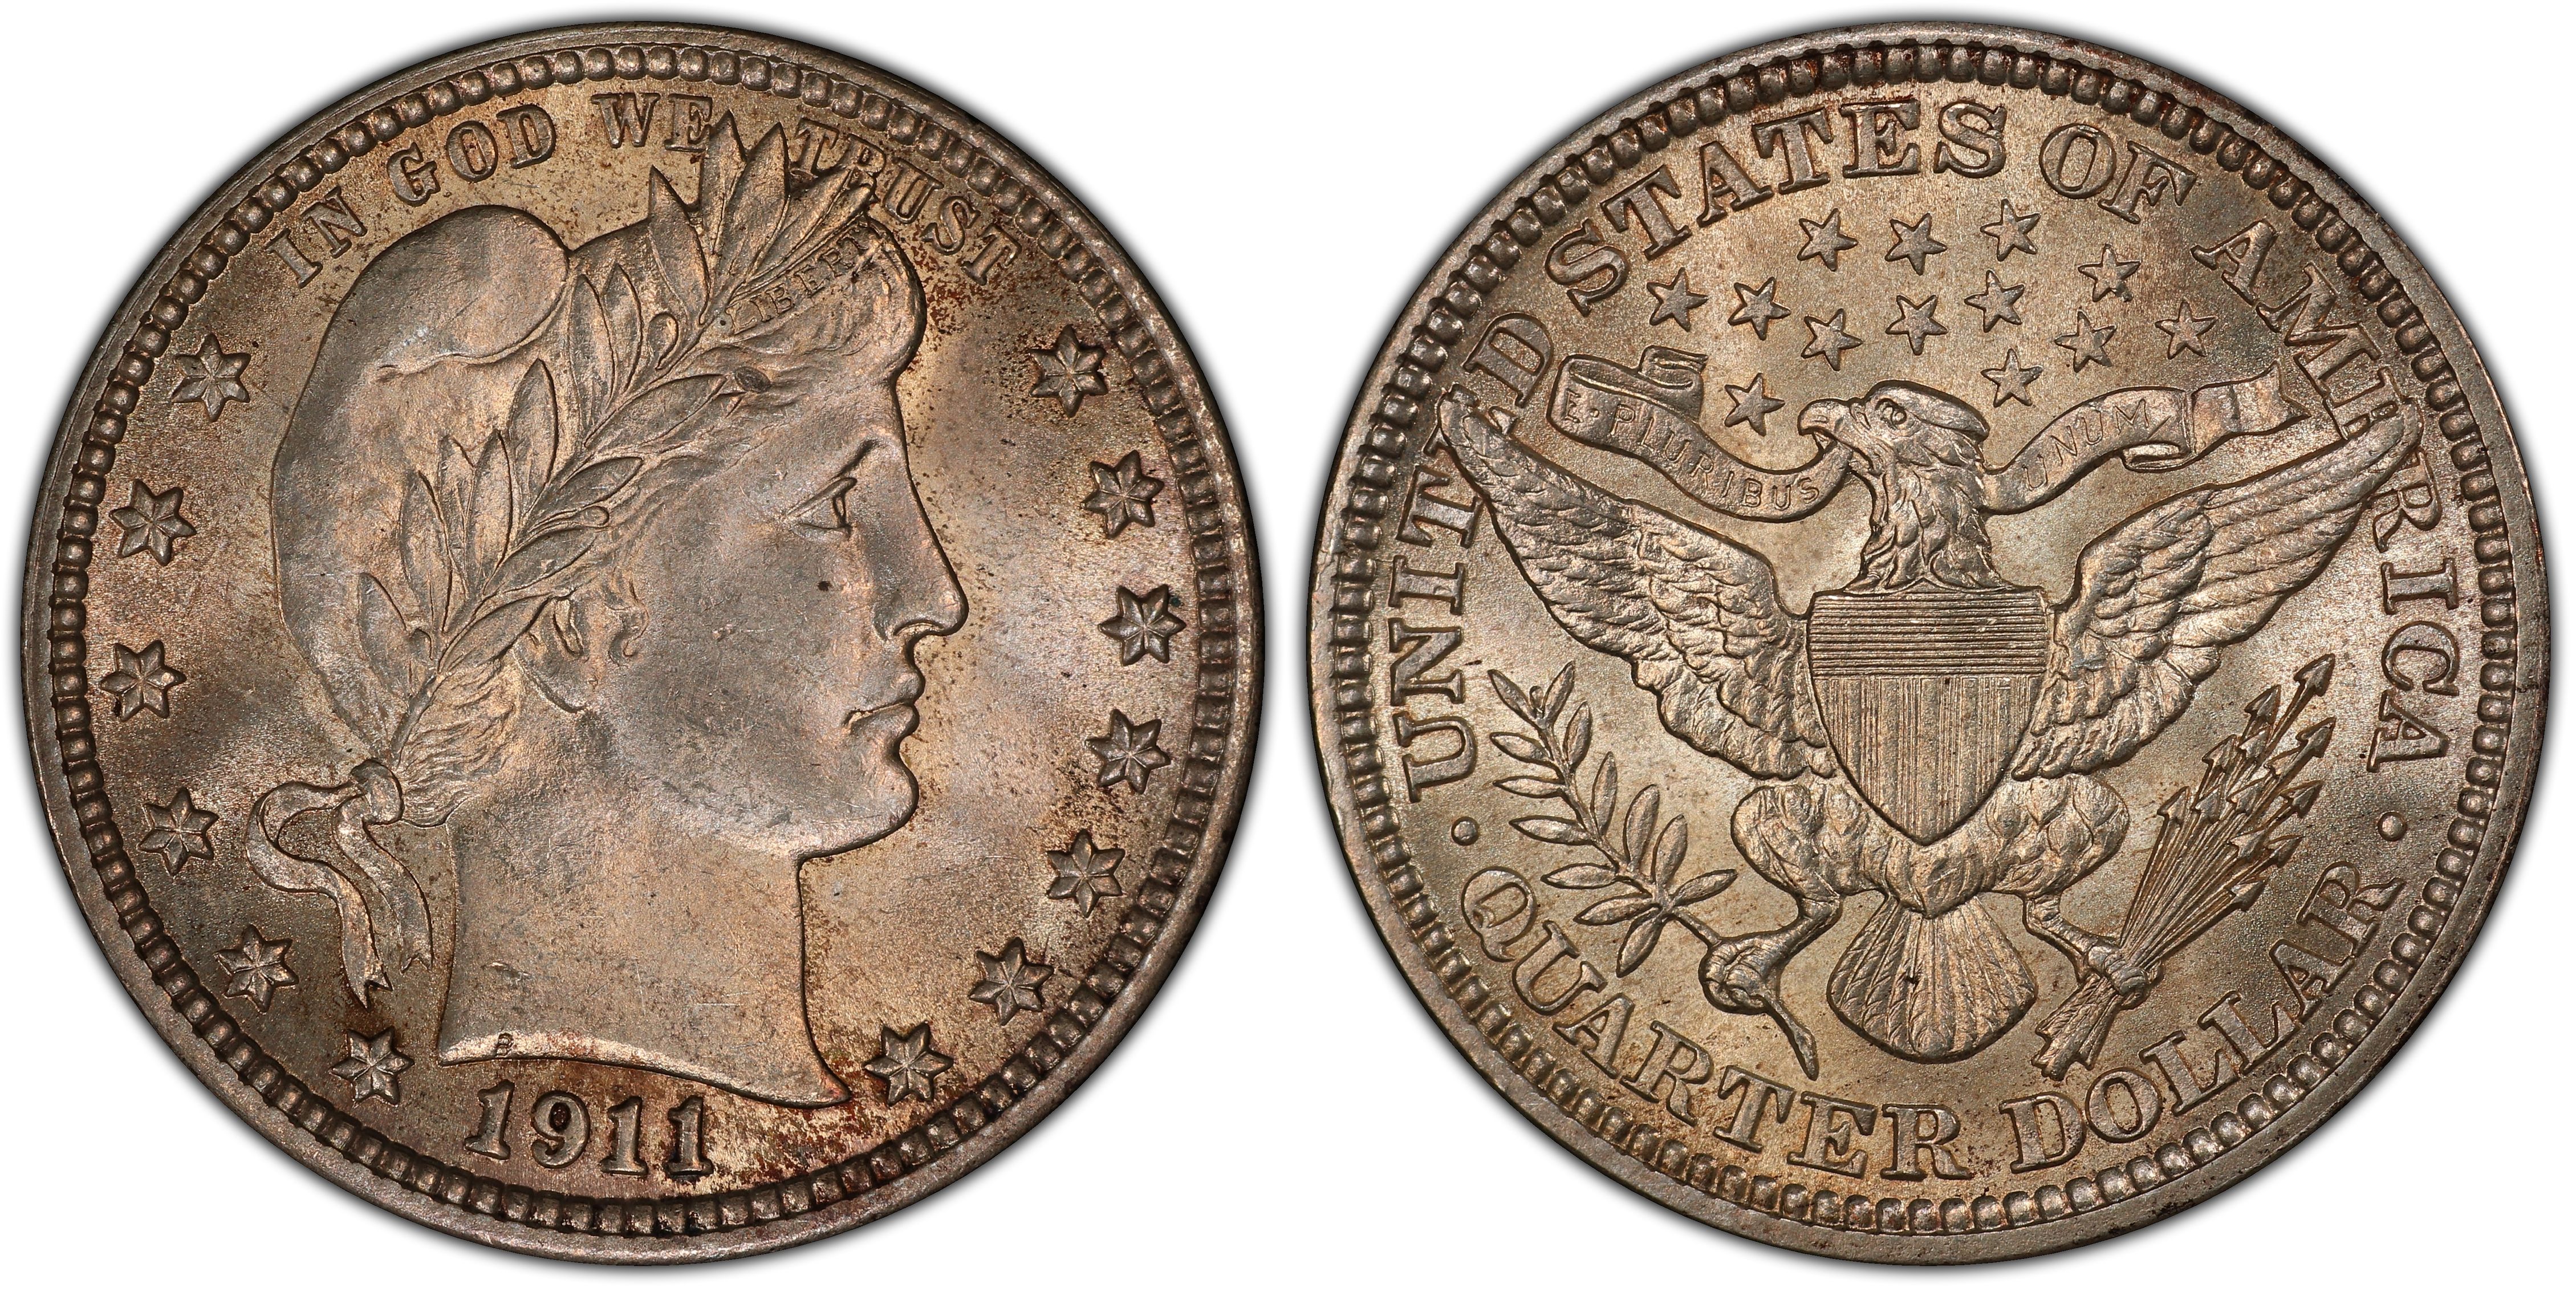 Images of Barber Quarter 1911 25C - PCGS CoinFacts